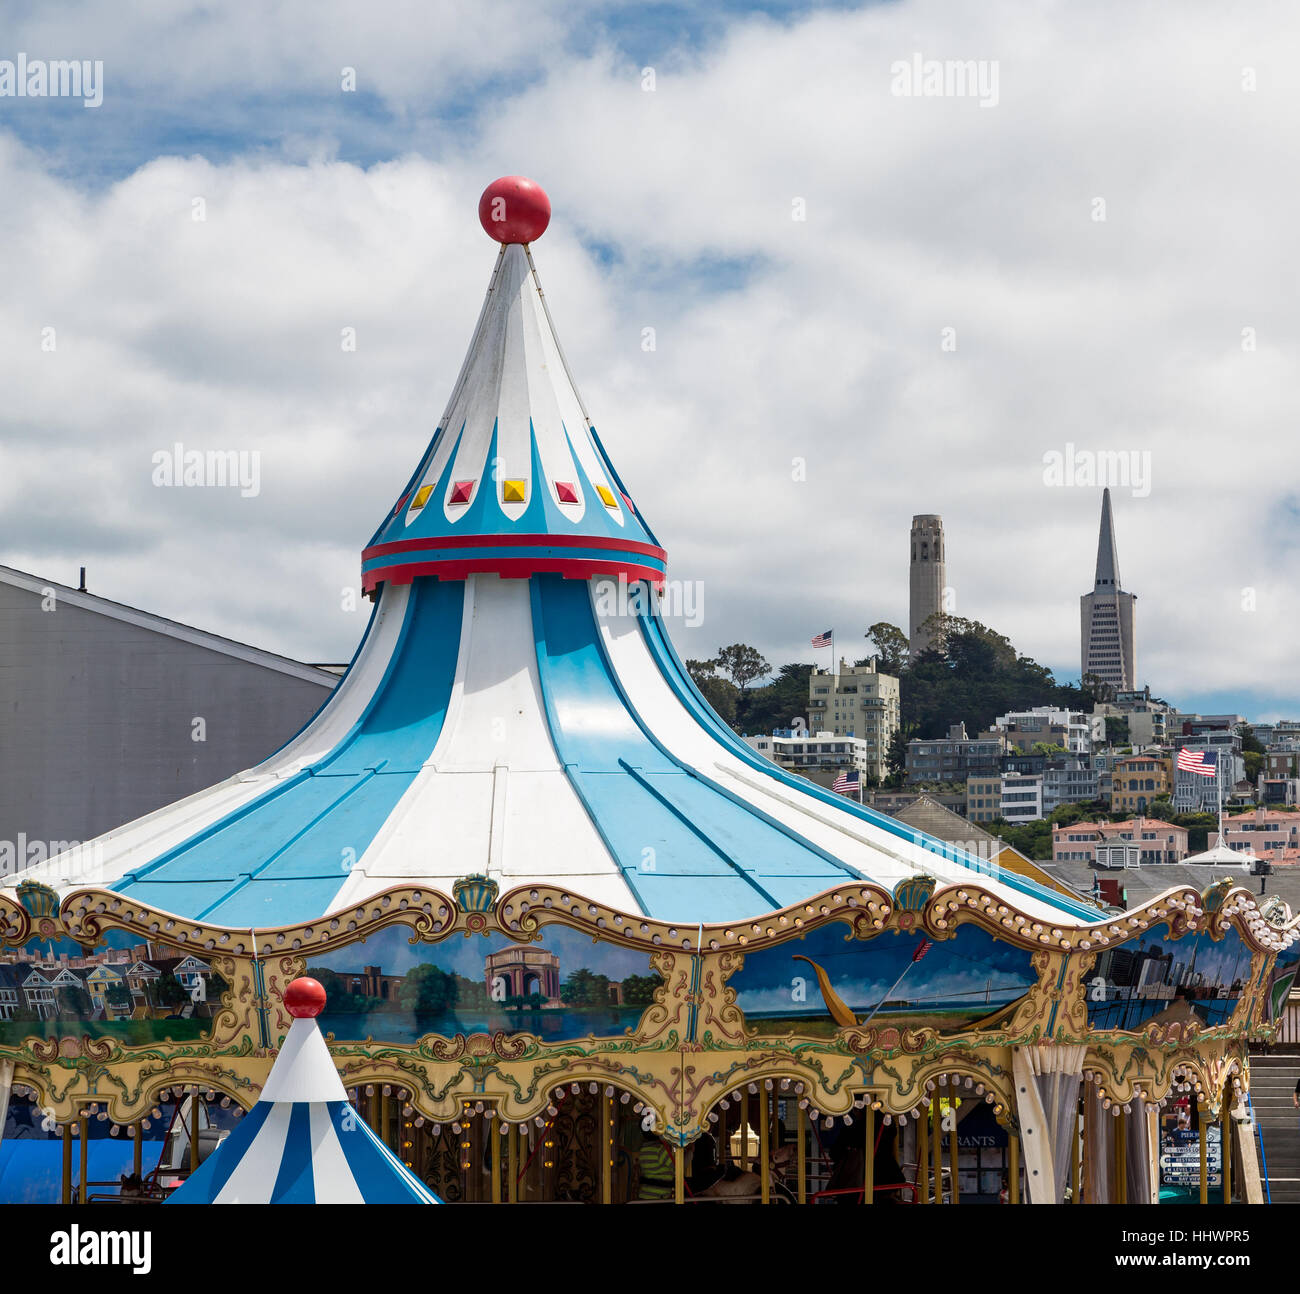 Top of carousel with two towers in the background Stock Photo